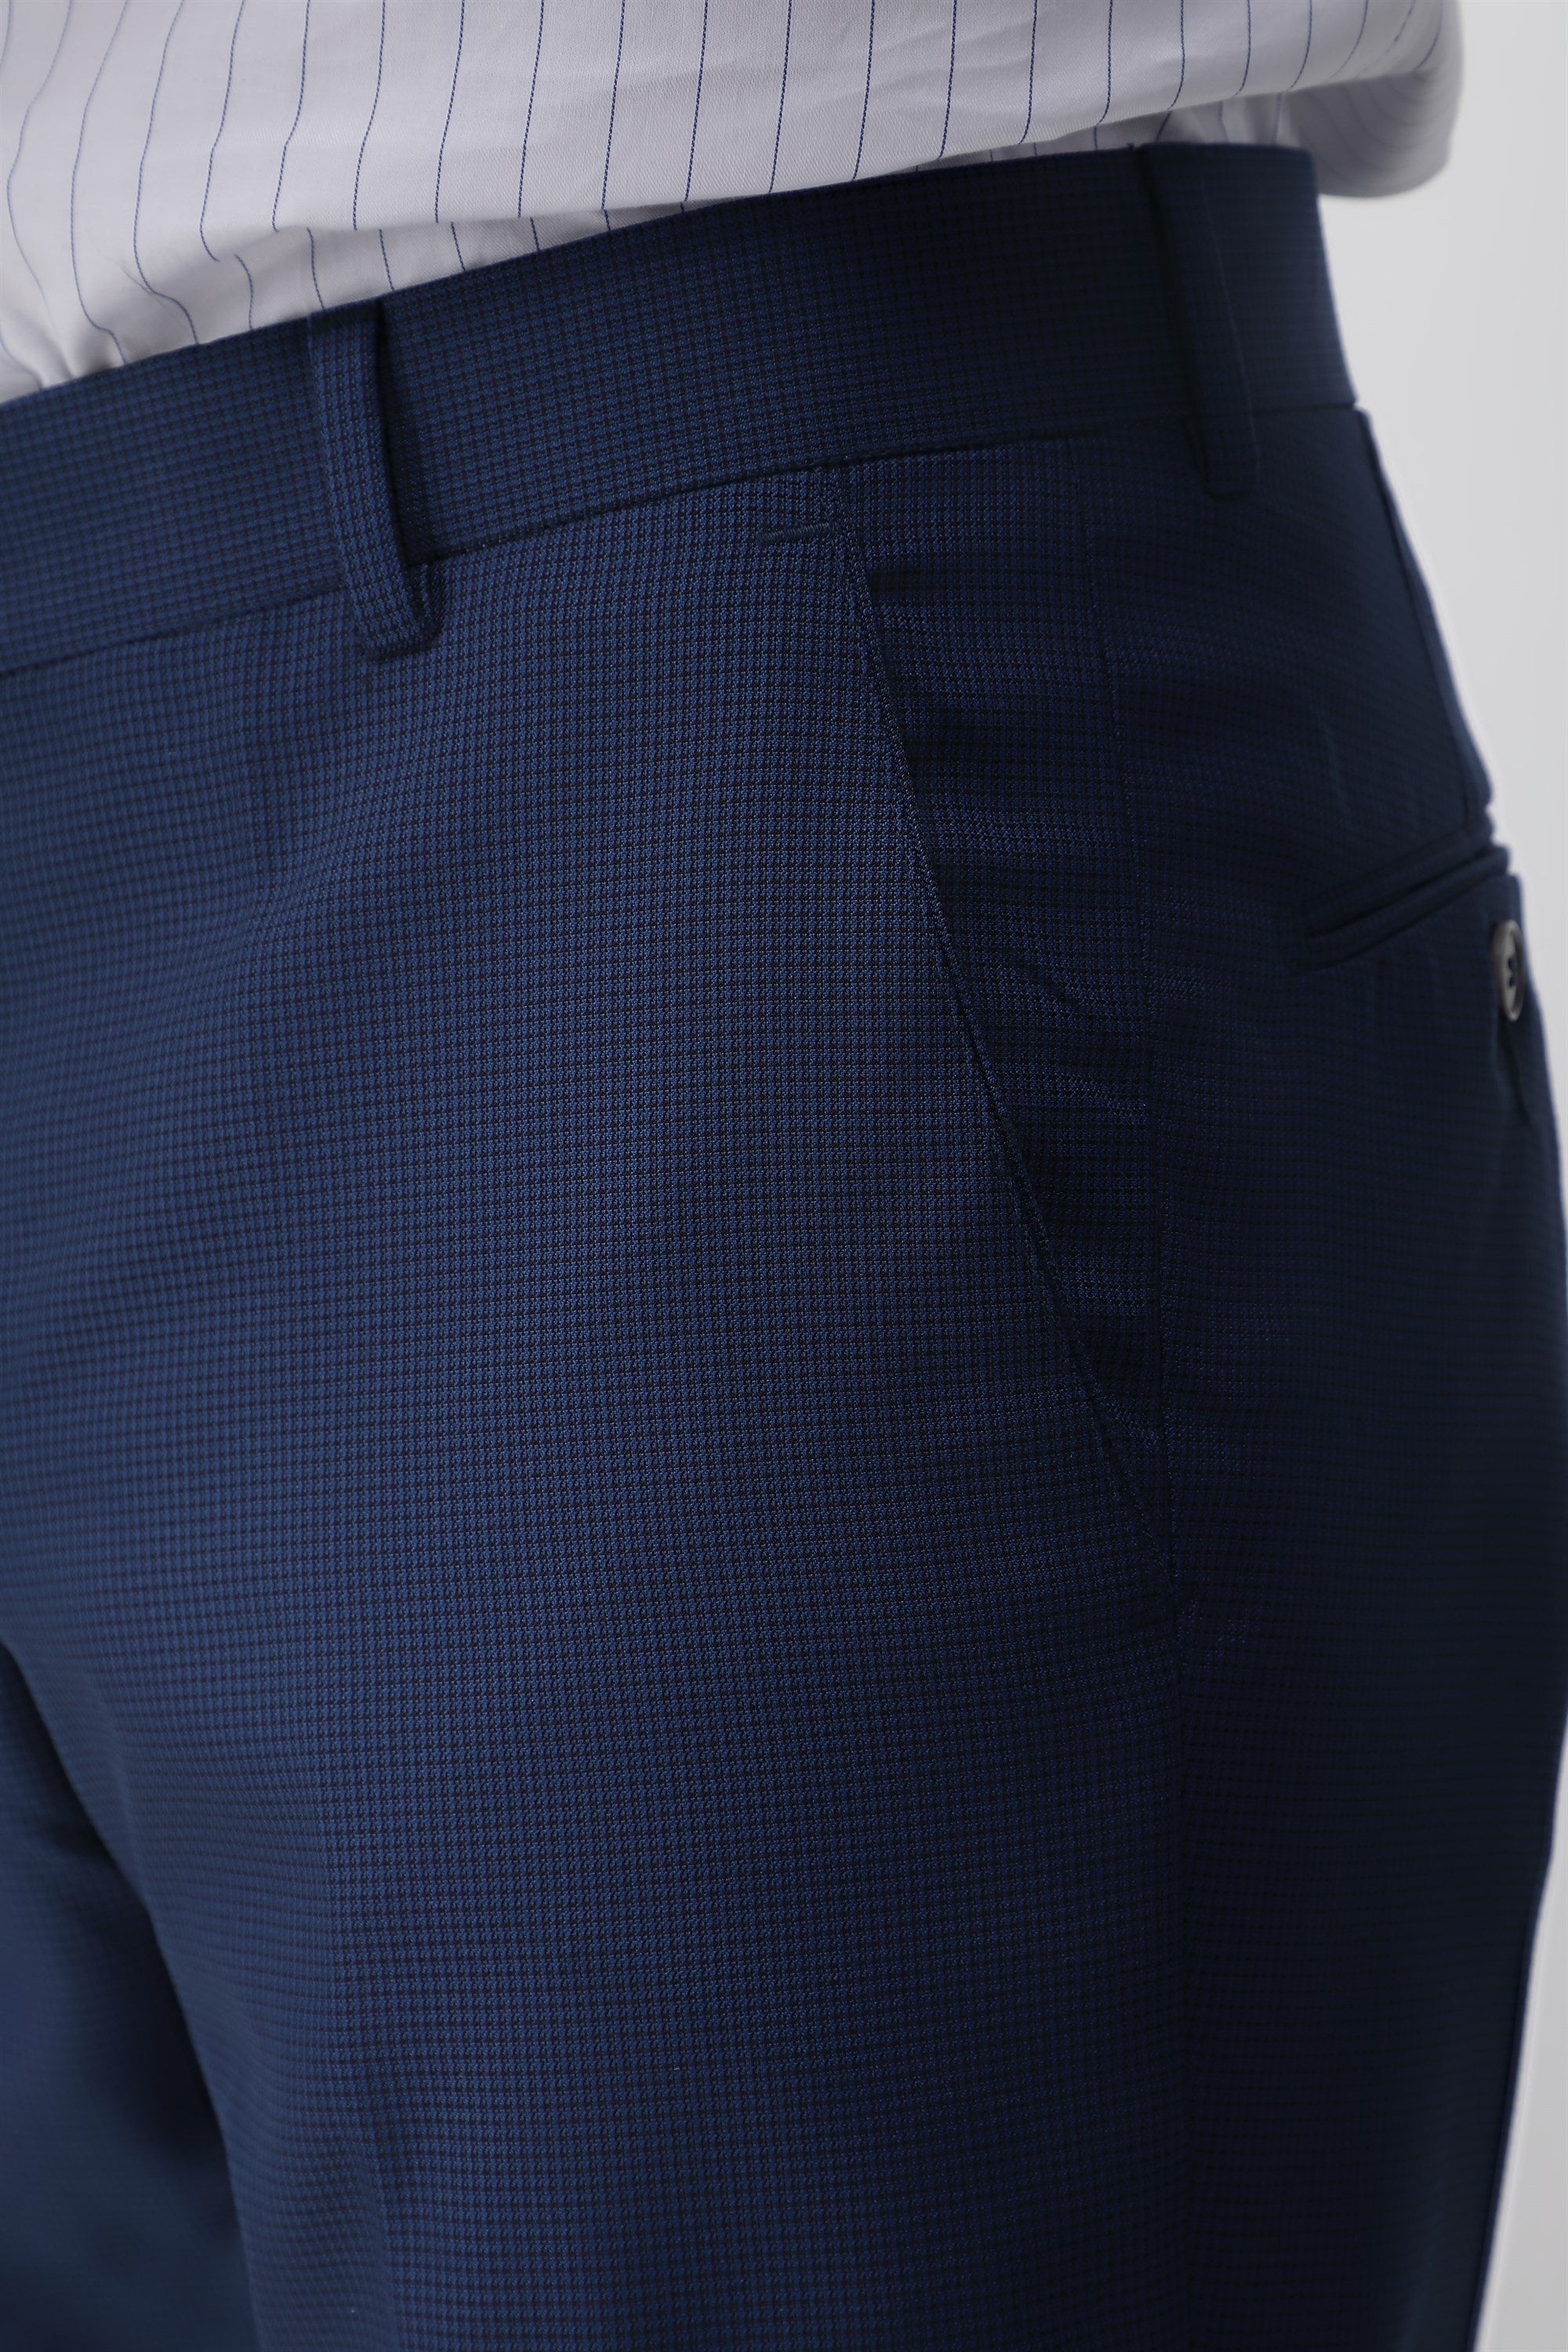 Buy Navy Blue Trousers  Pants for Men by The Indian Garage Co Online   Ajiocom